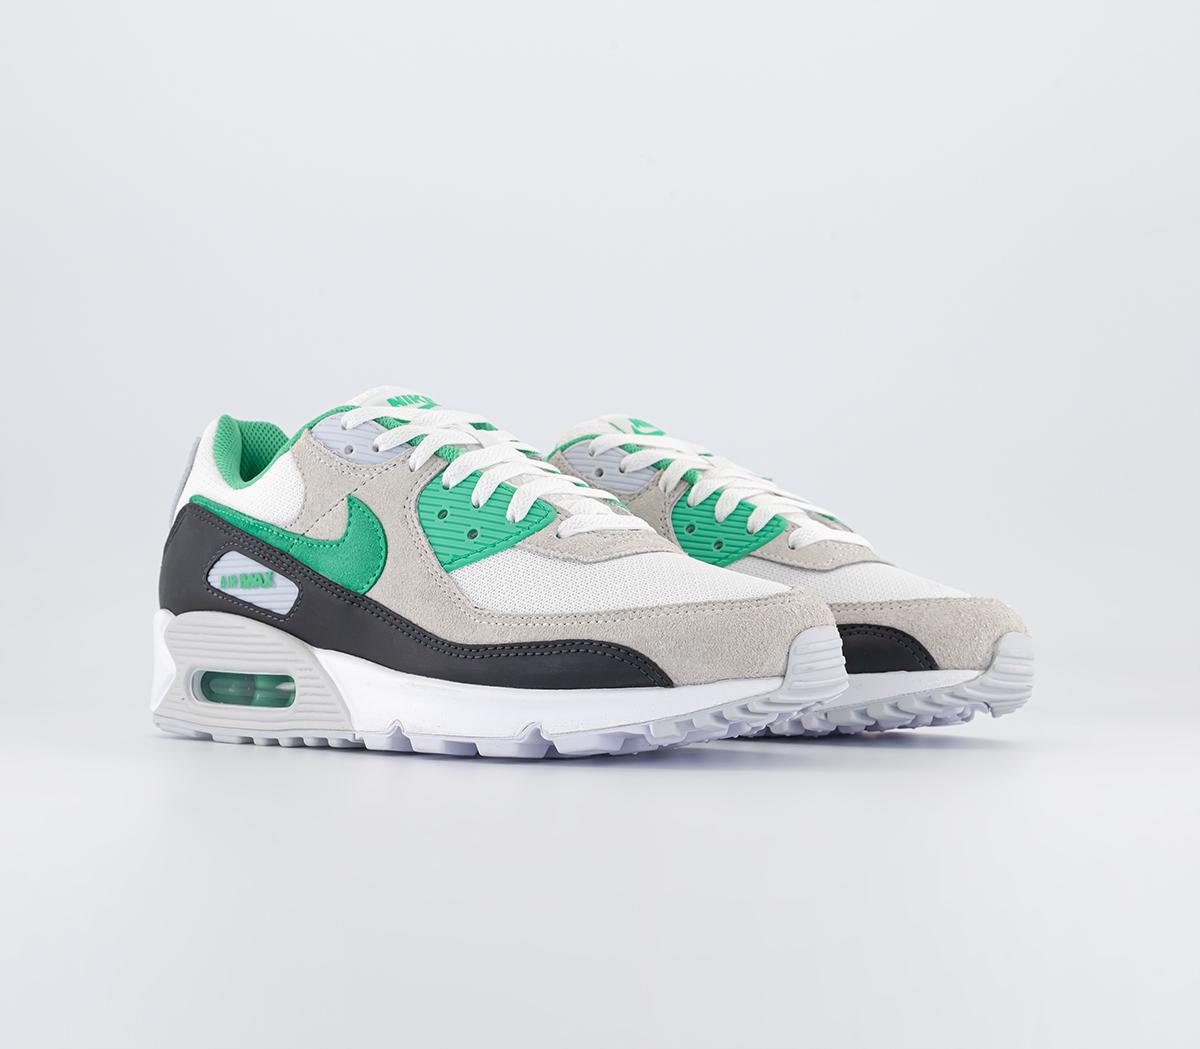 Nike Air Max 90 Trainers White Spring Green Anthracite, 9